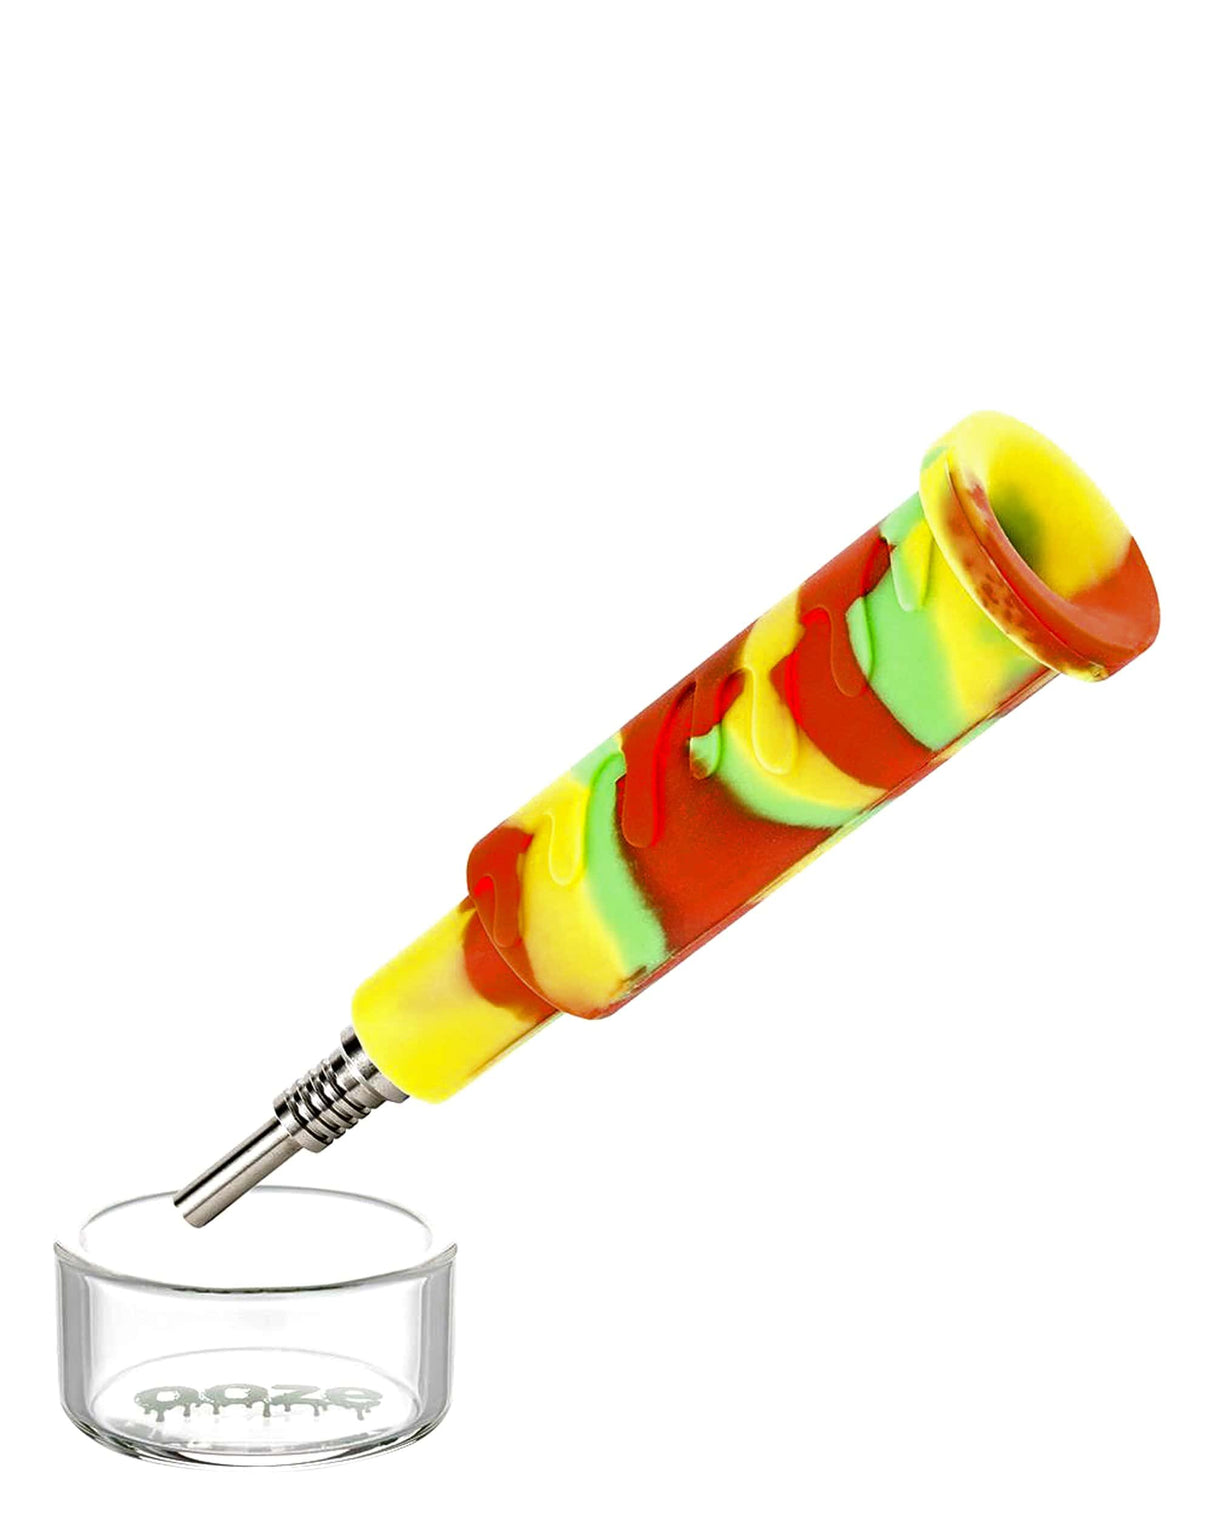 Ooze Cranium Bong & Dab Rig in vibrant yellow, red & green with quartz banger, side view